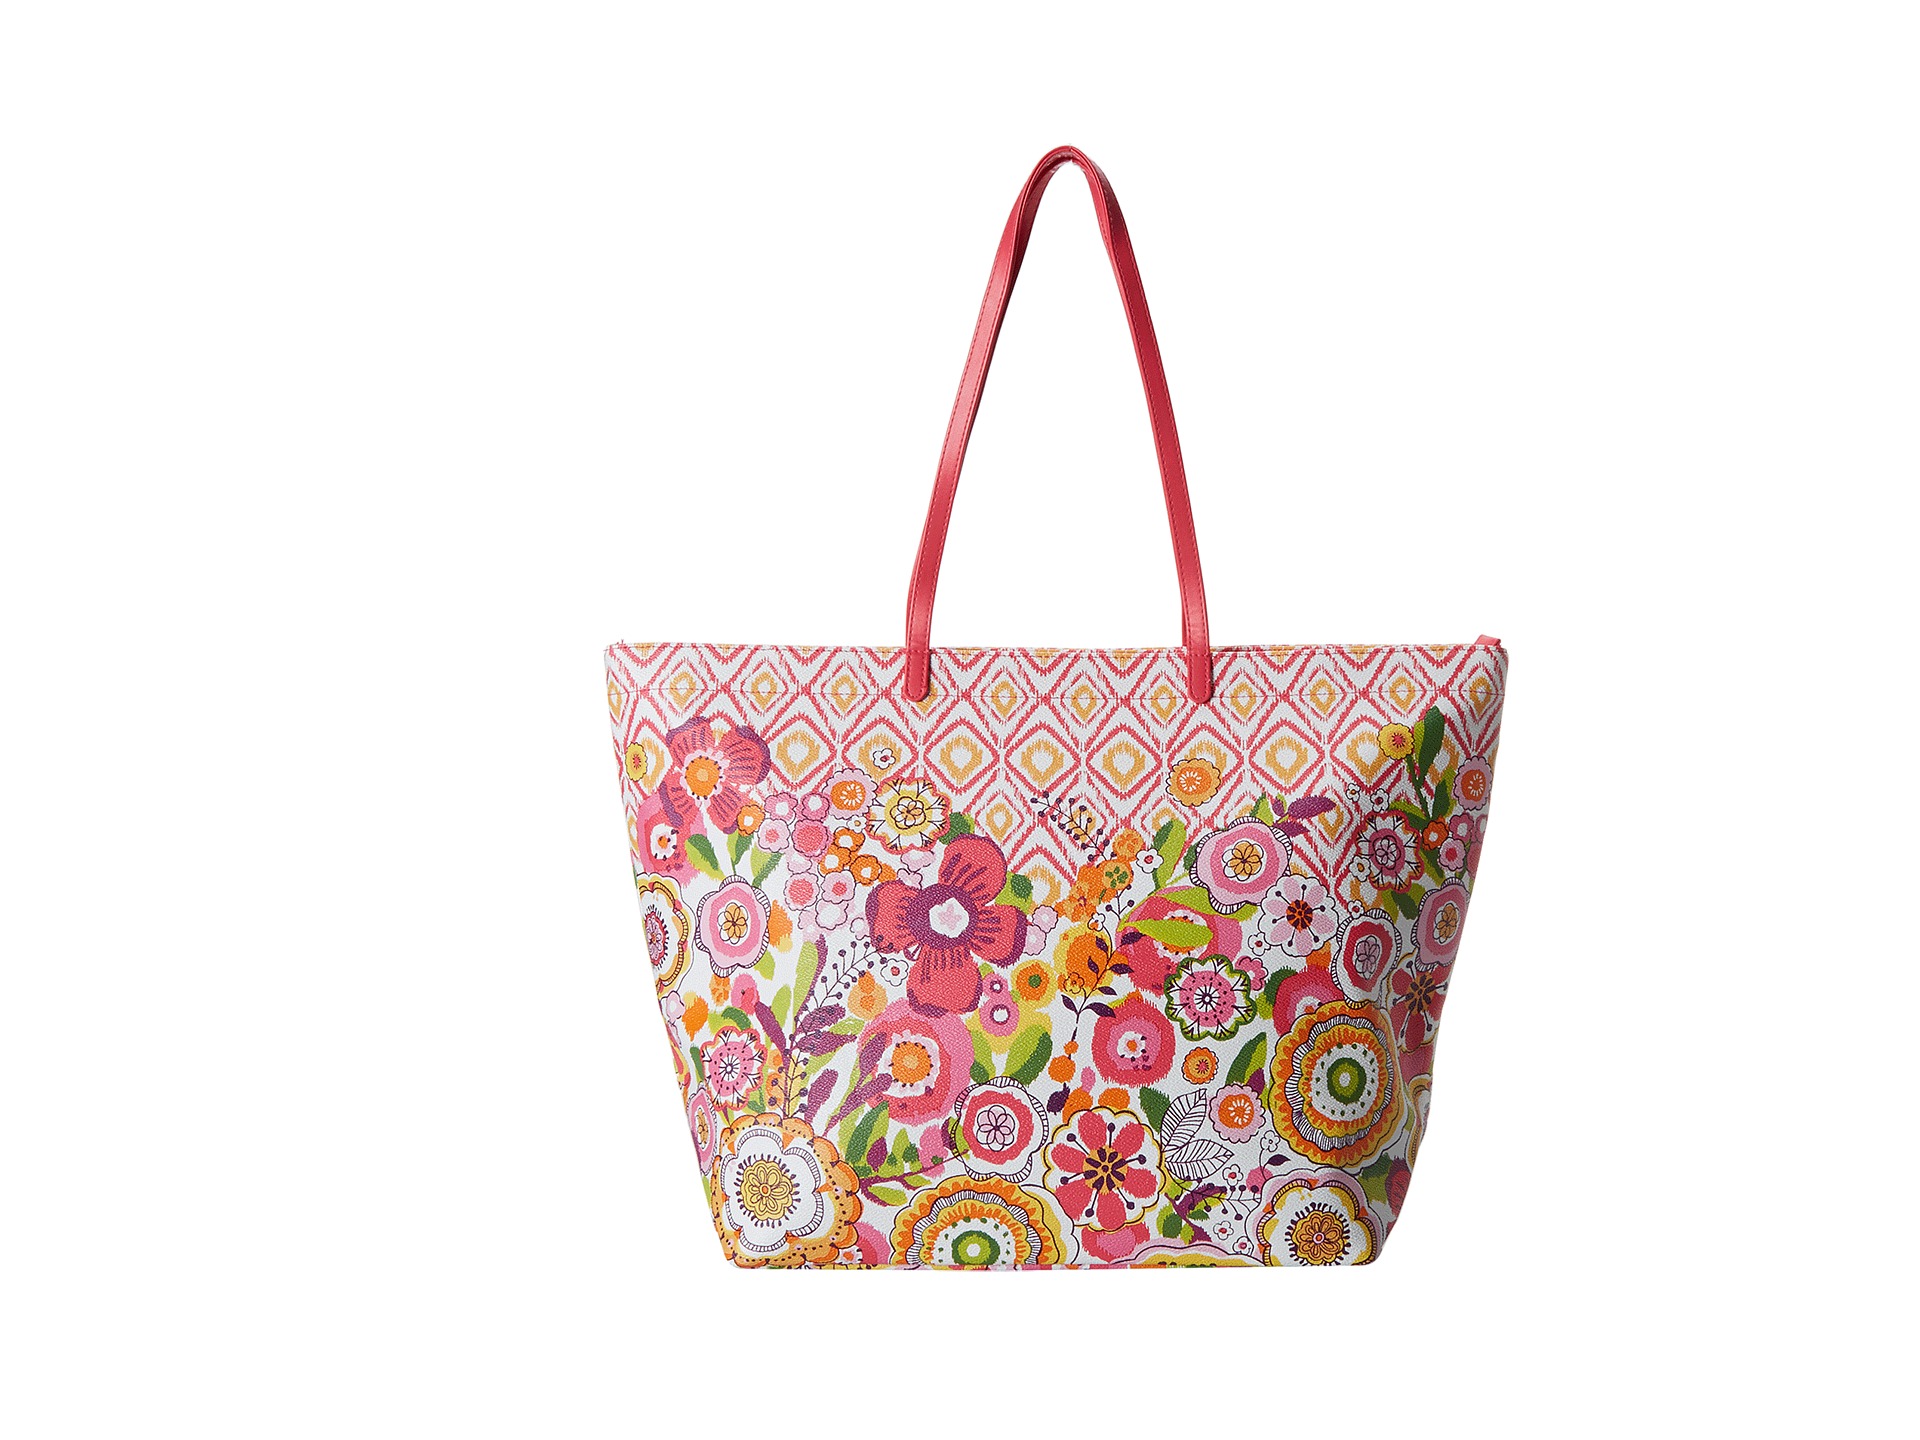 Vera Bradley Pattern Play Tote Clementine | Shipped Free at Zappos